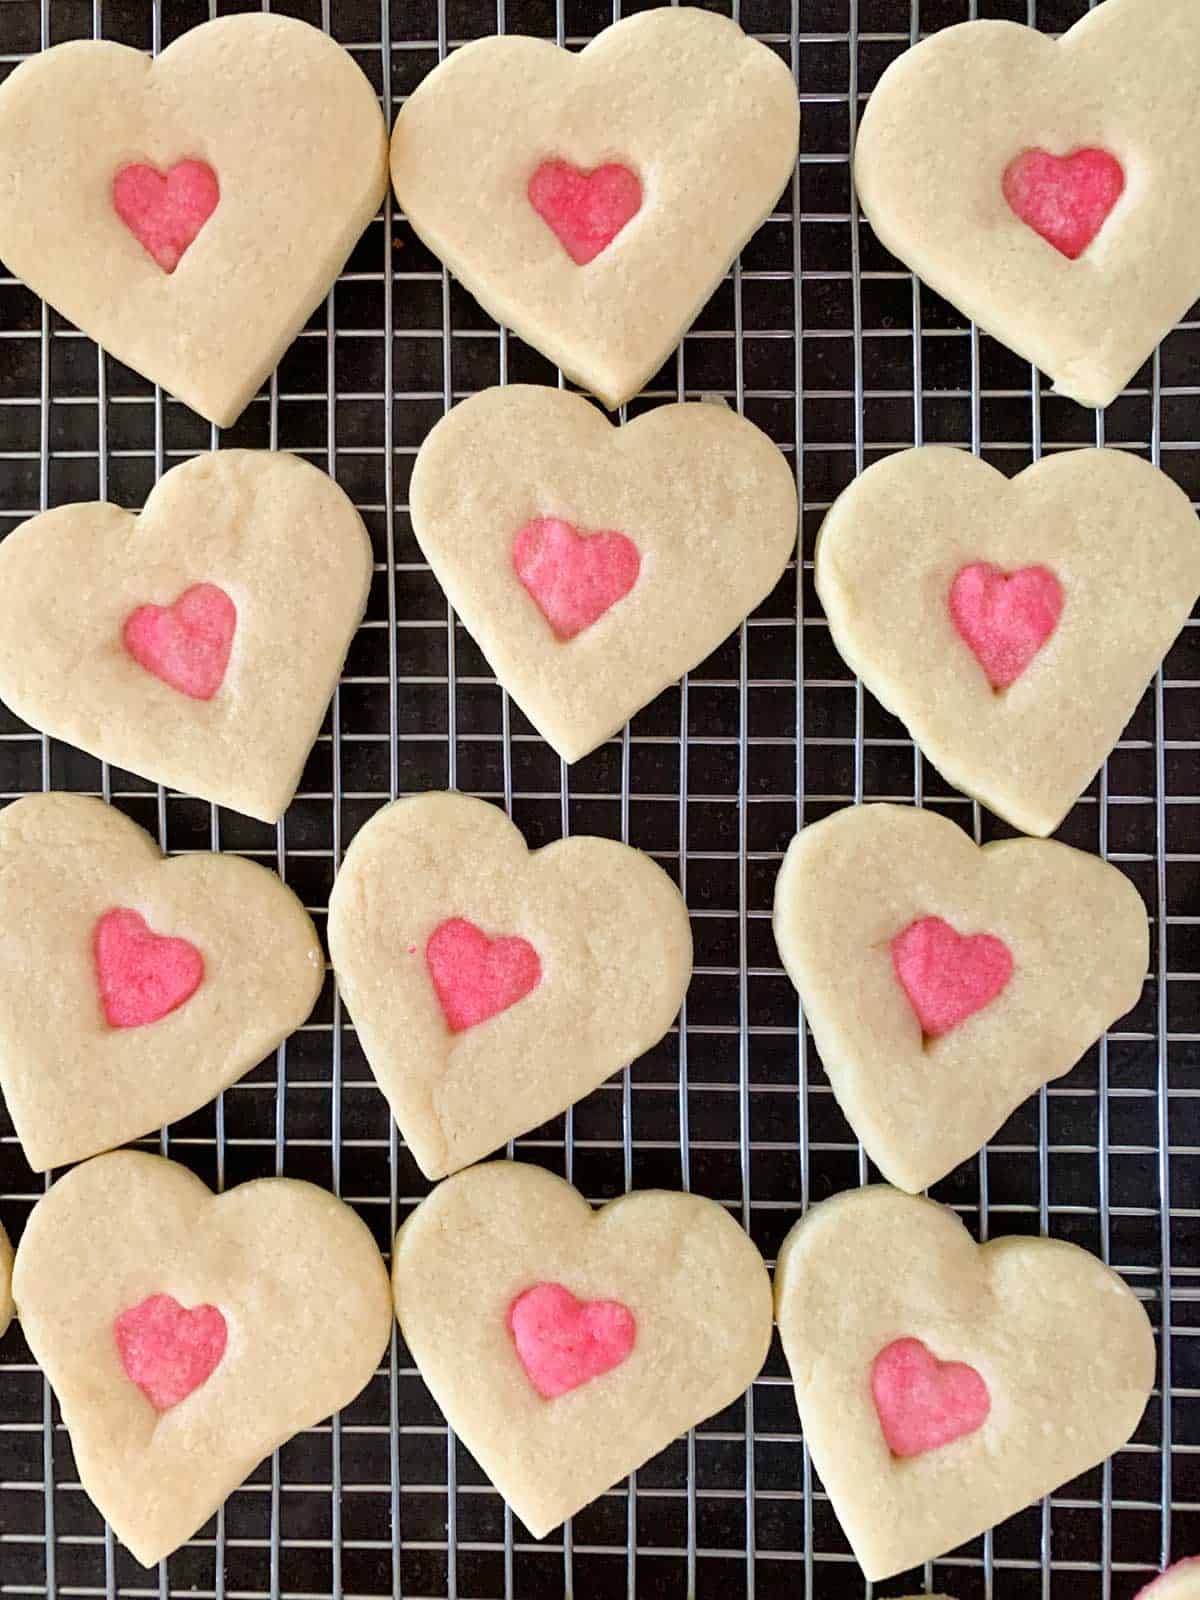 Baked 2 heart cookies on a cooling rack, small pink heart in the middle of a larger white heart.